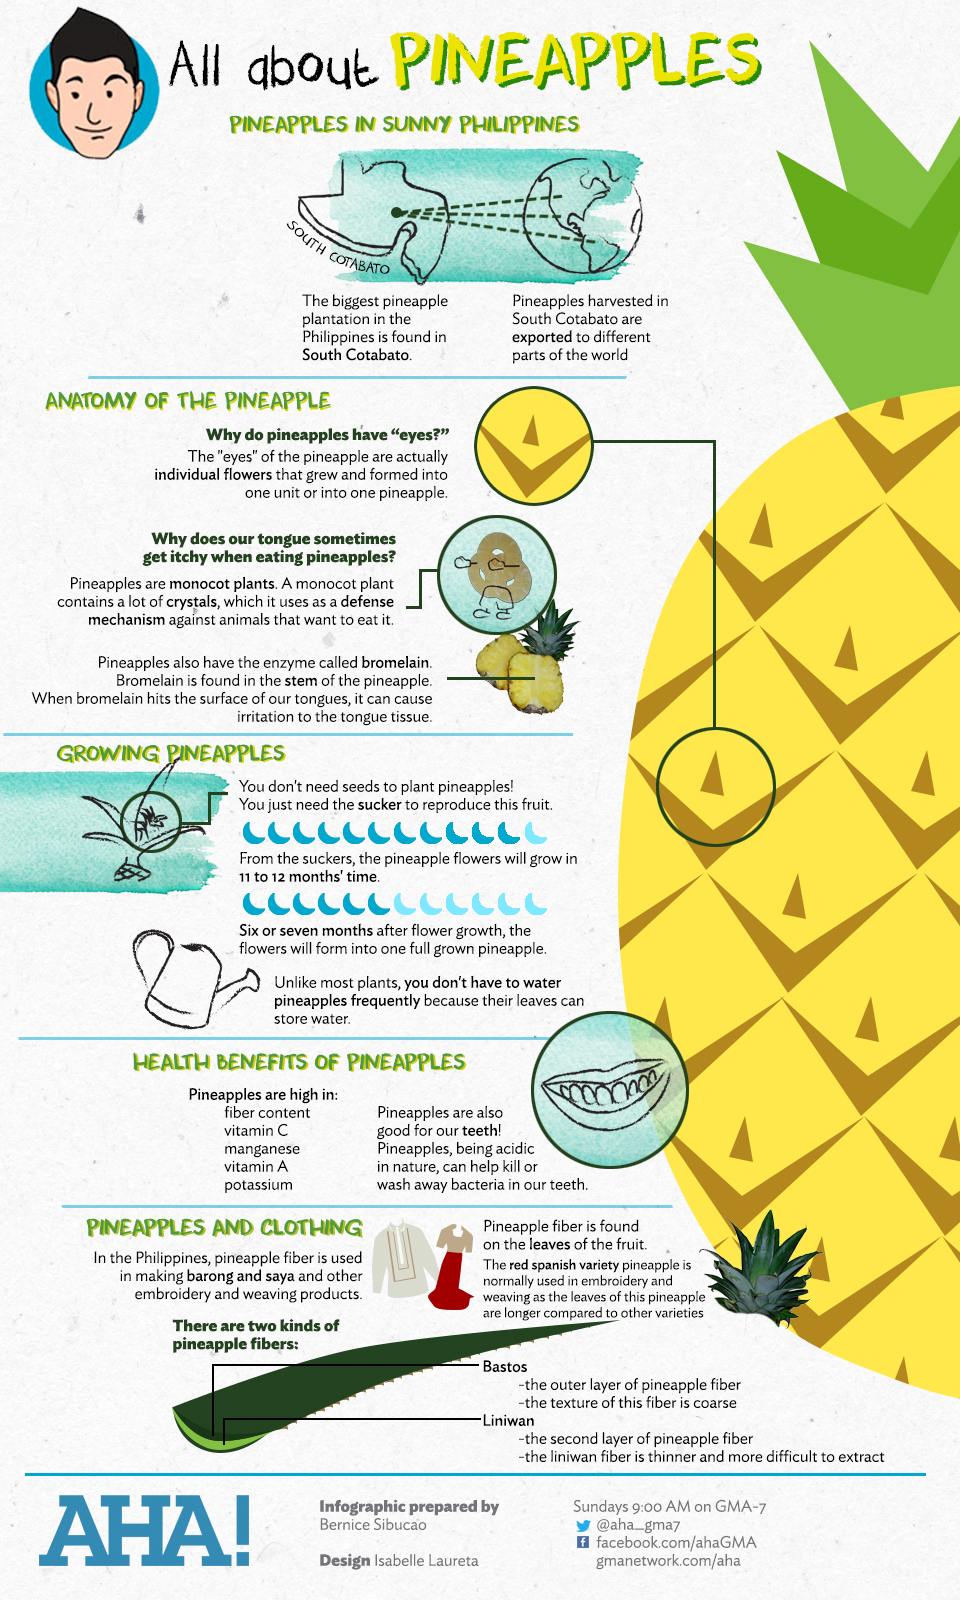 All About Pineapples